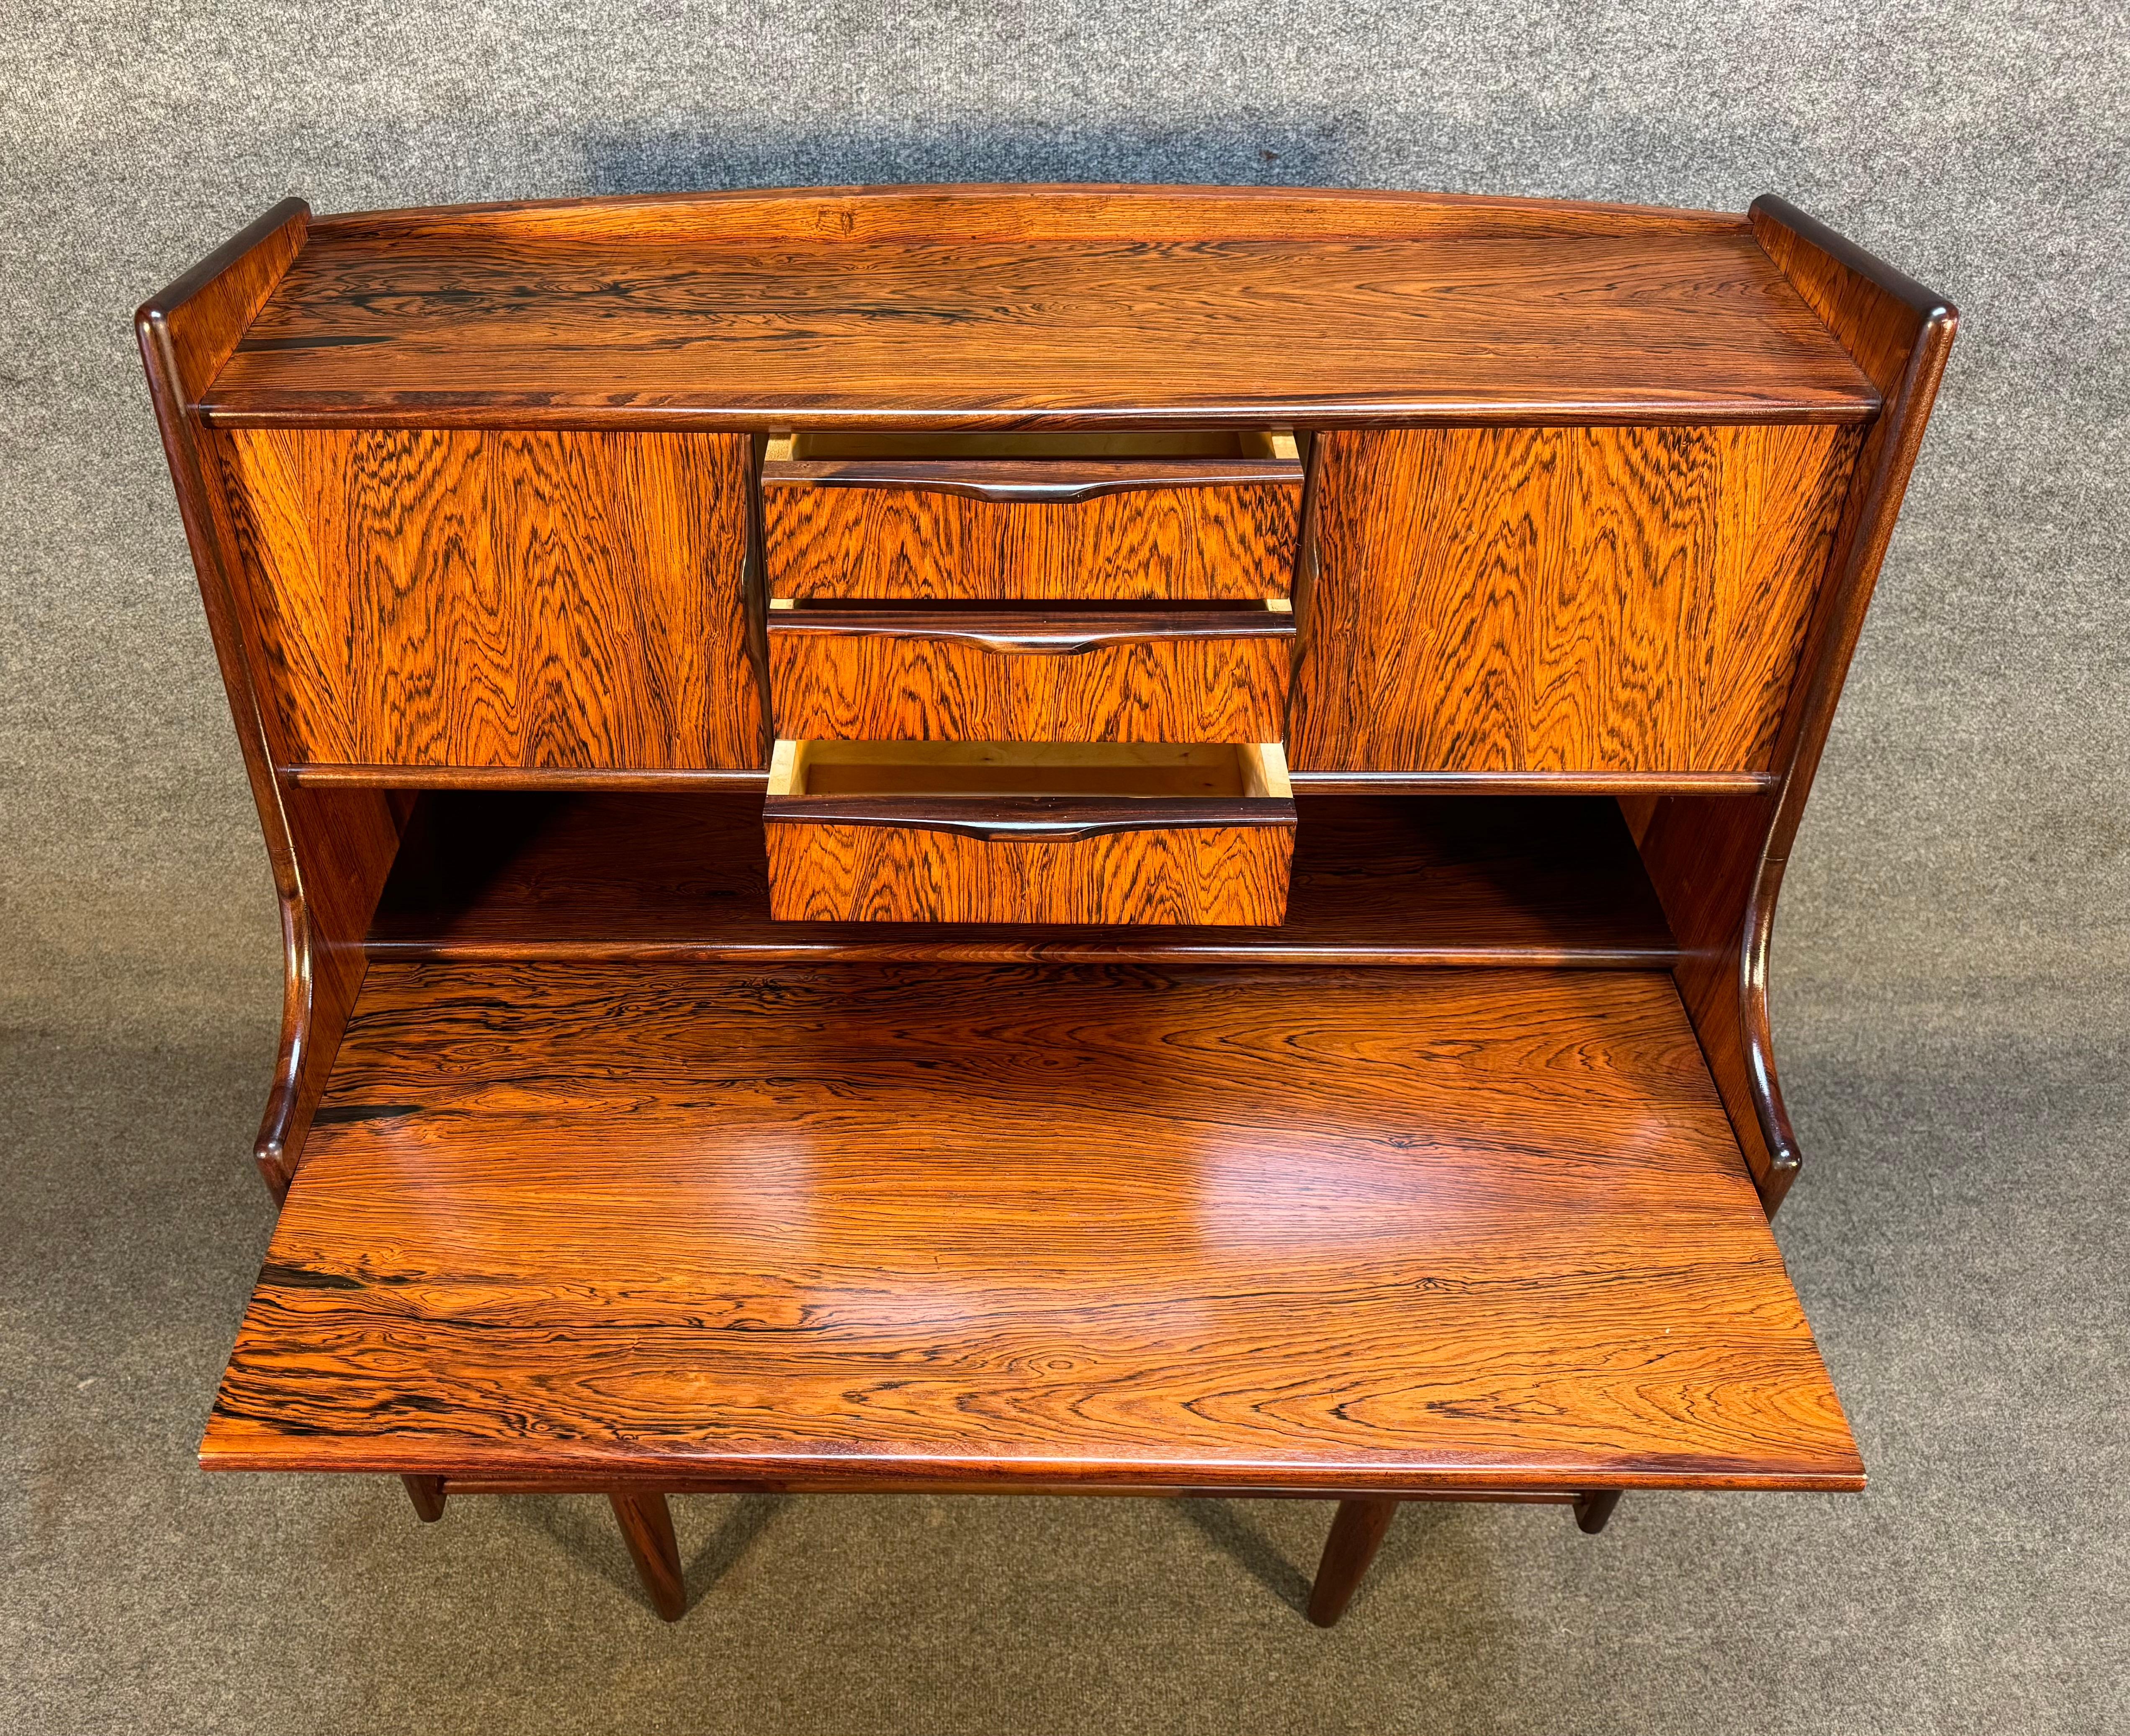 Here is a beautiful scandinavian modern secretary desk in rosewood manufactured in Denmark in the 1960's.
This exquisite case piece, recently imported from Europe to California before its refinishing, features a vibrant wood grain, a central bank of